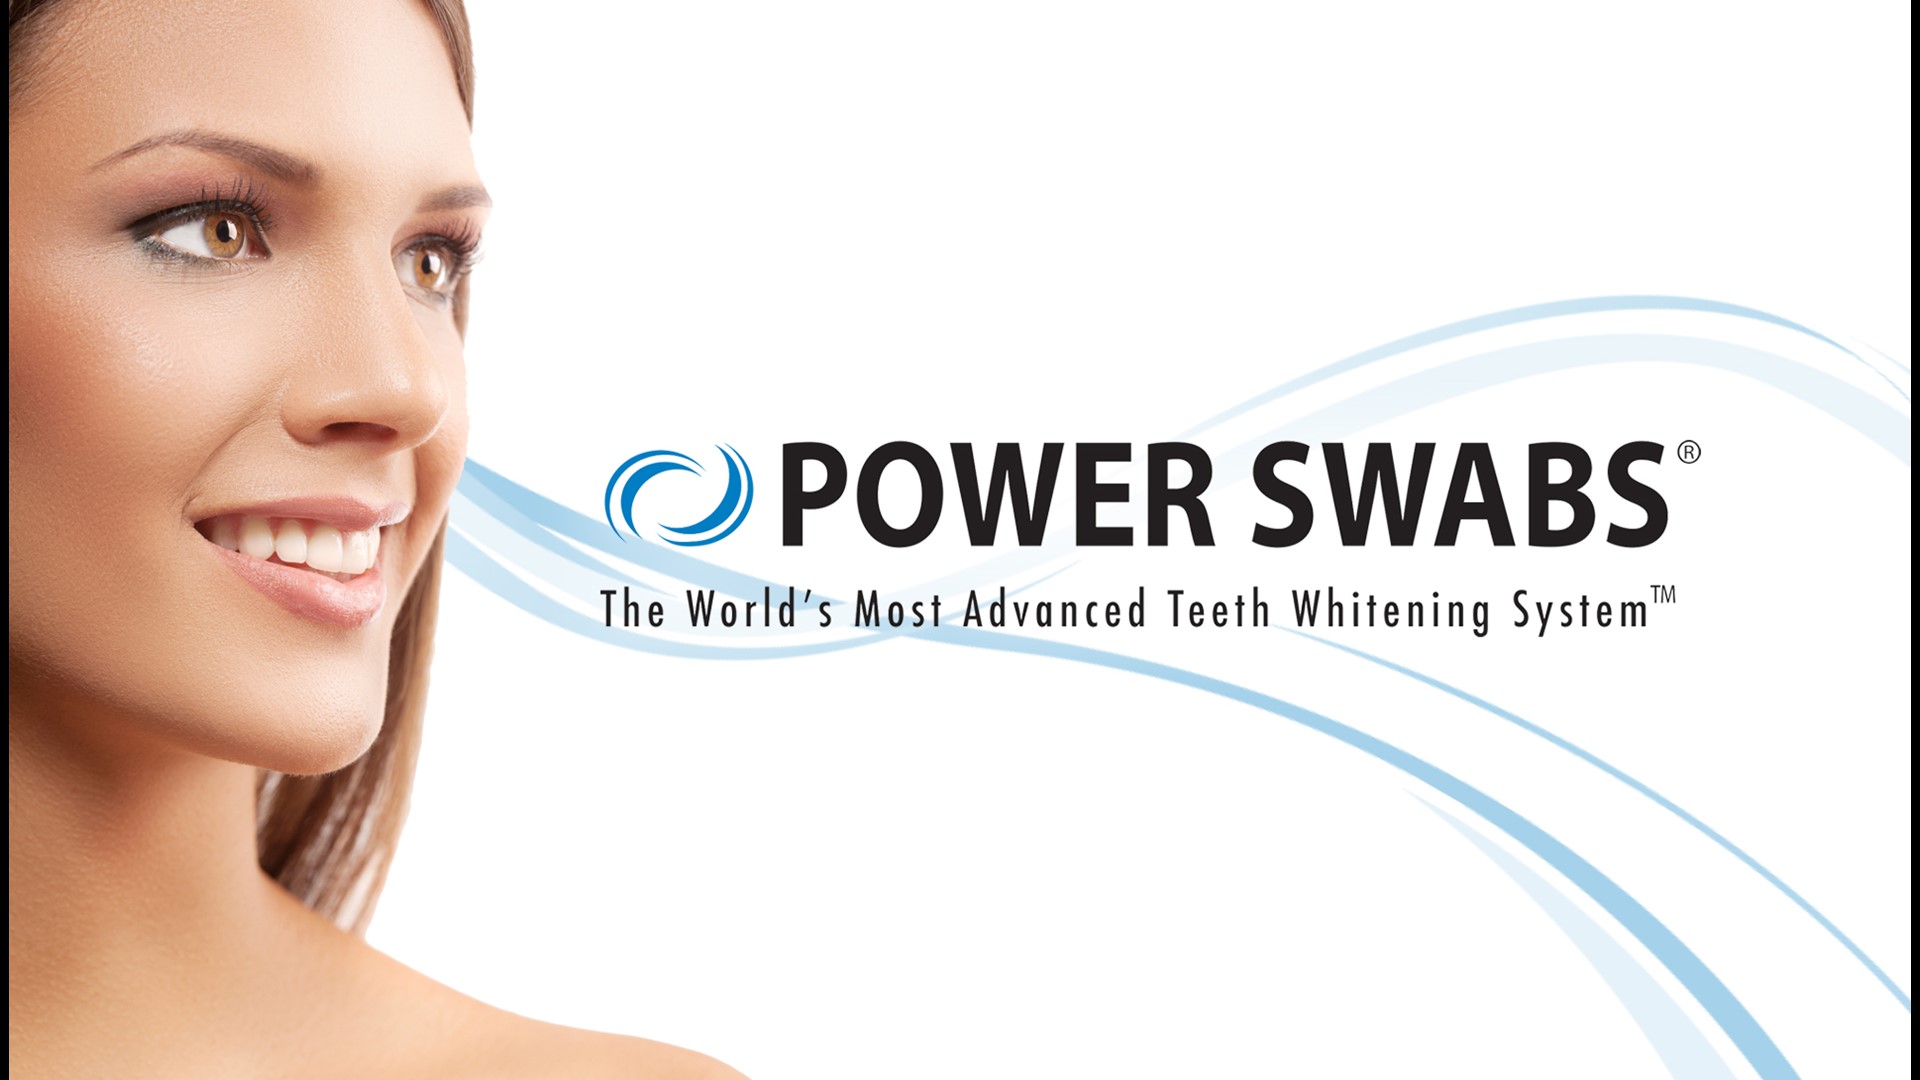 Power Swabs can give you a whiter smile in just five minutes with no sensitivity! It works on fillings, caps and veneers. For more information, visit www.powerswabs.com or call 1-800-208-0739.